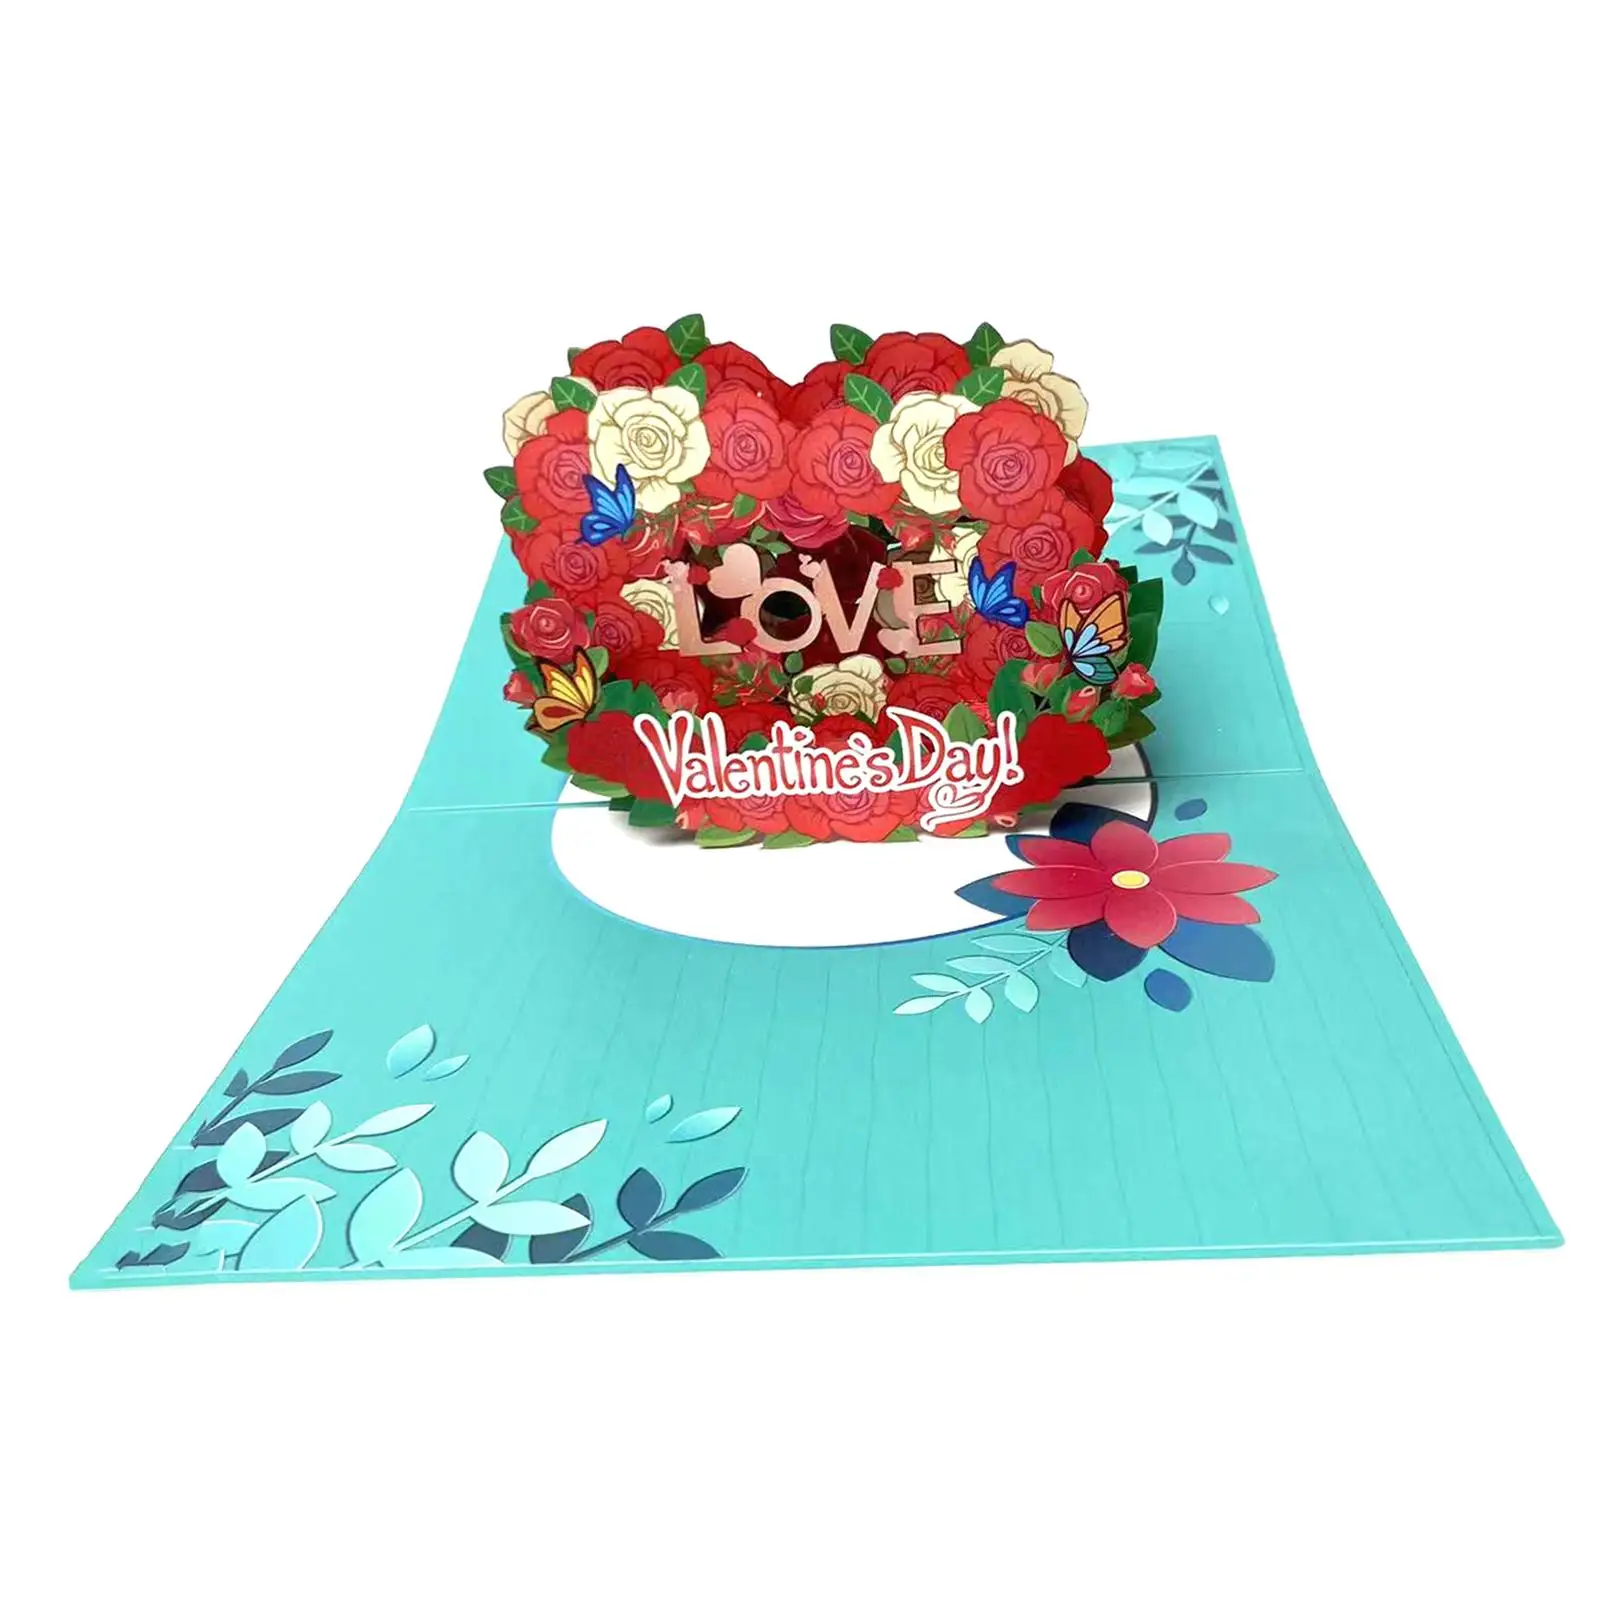 Valentines Day Cards Wedding Card Love Heart Flower Valentine Gift Cards 3D Greeting Cards for Festival Male Couple Boyfriend